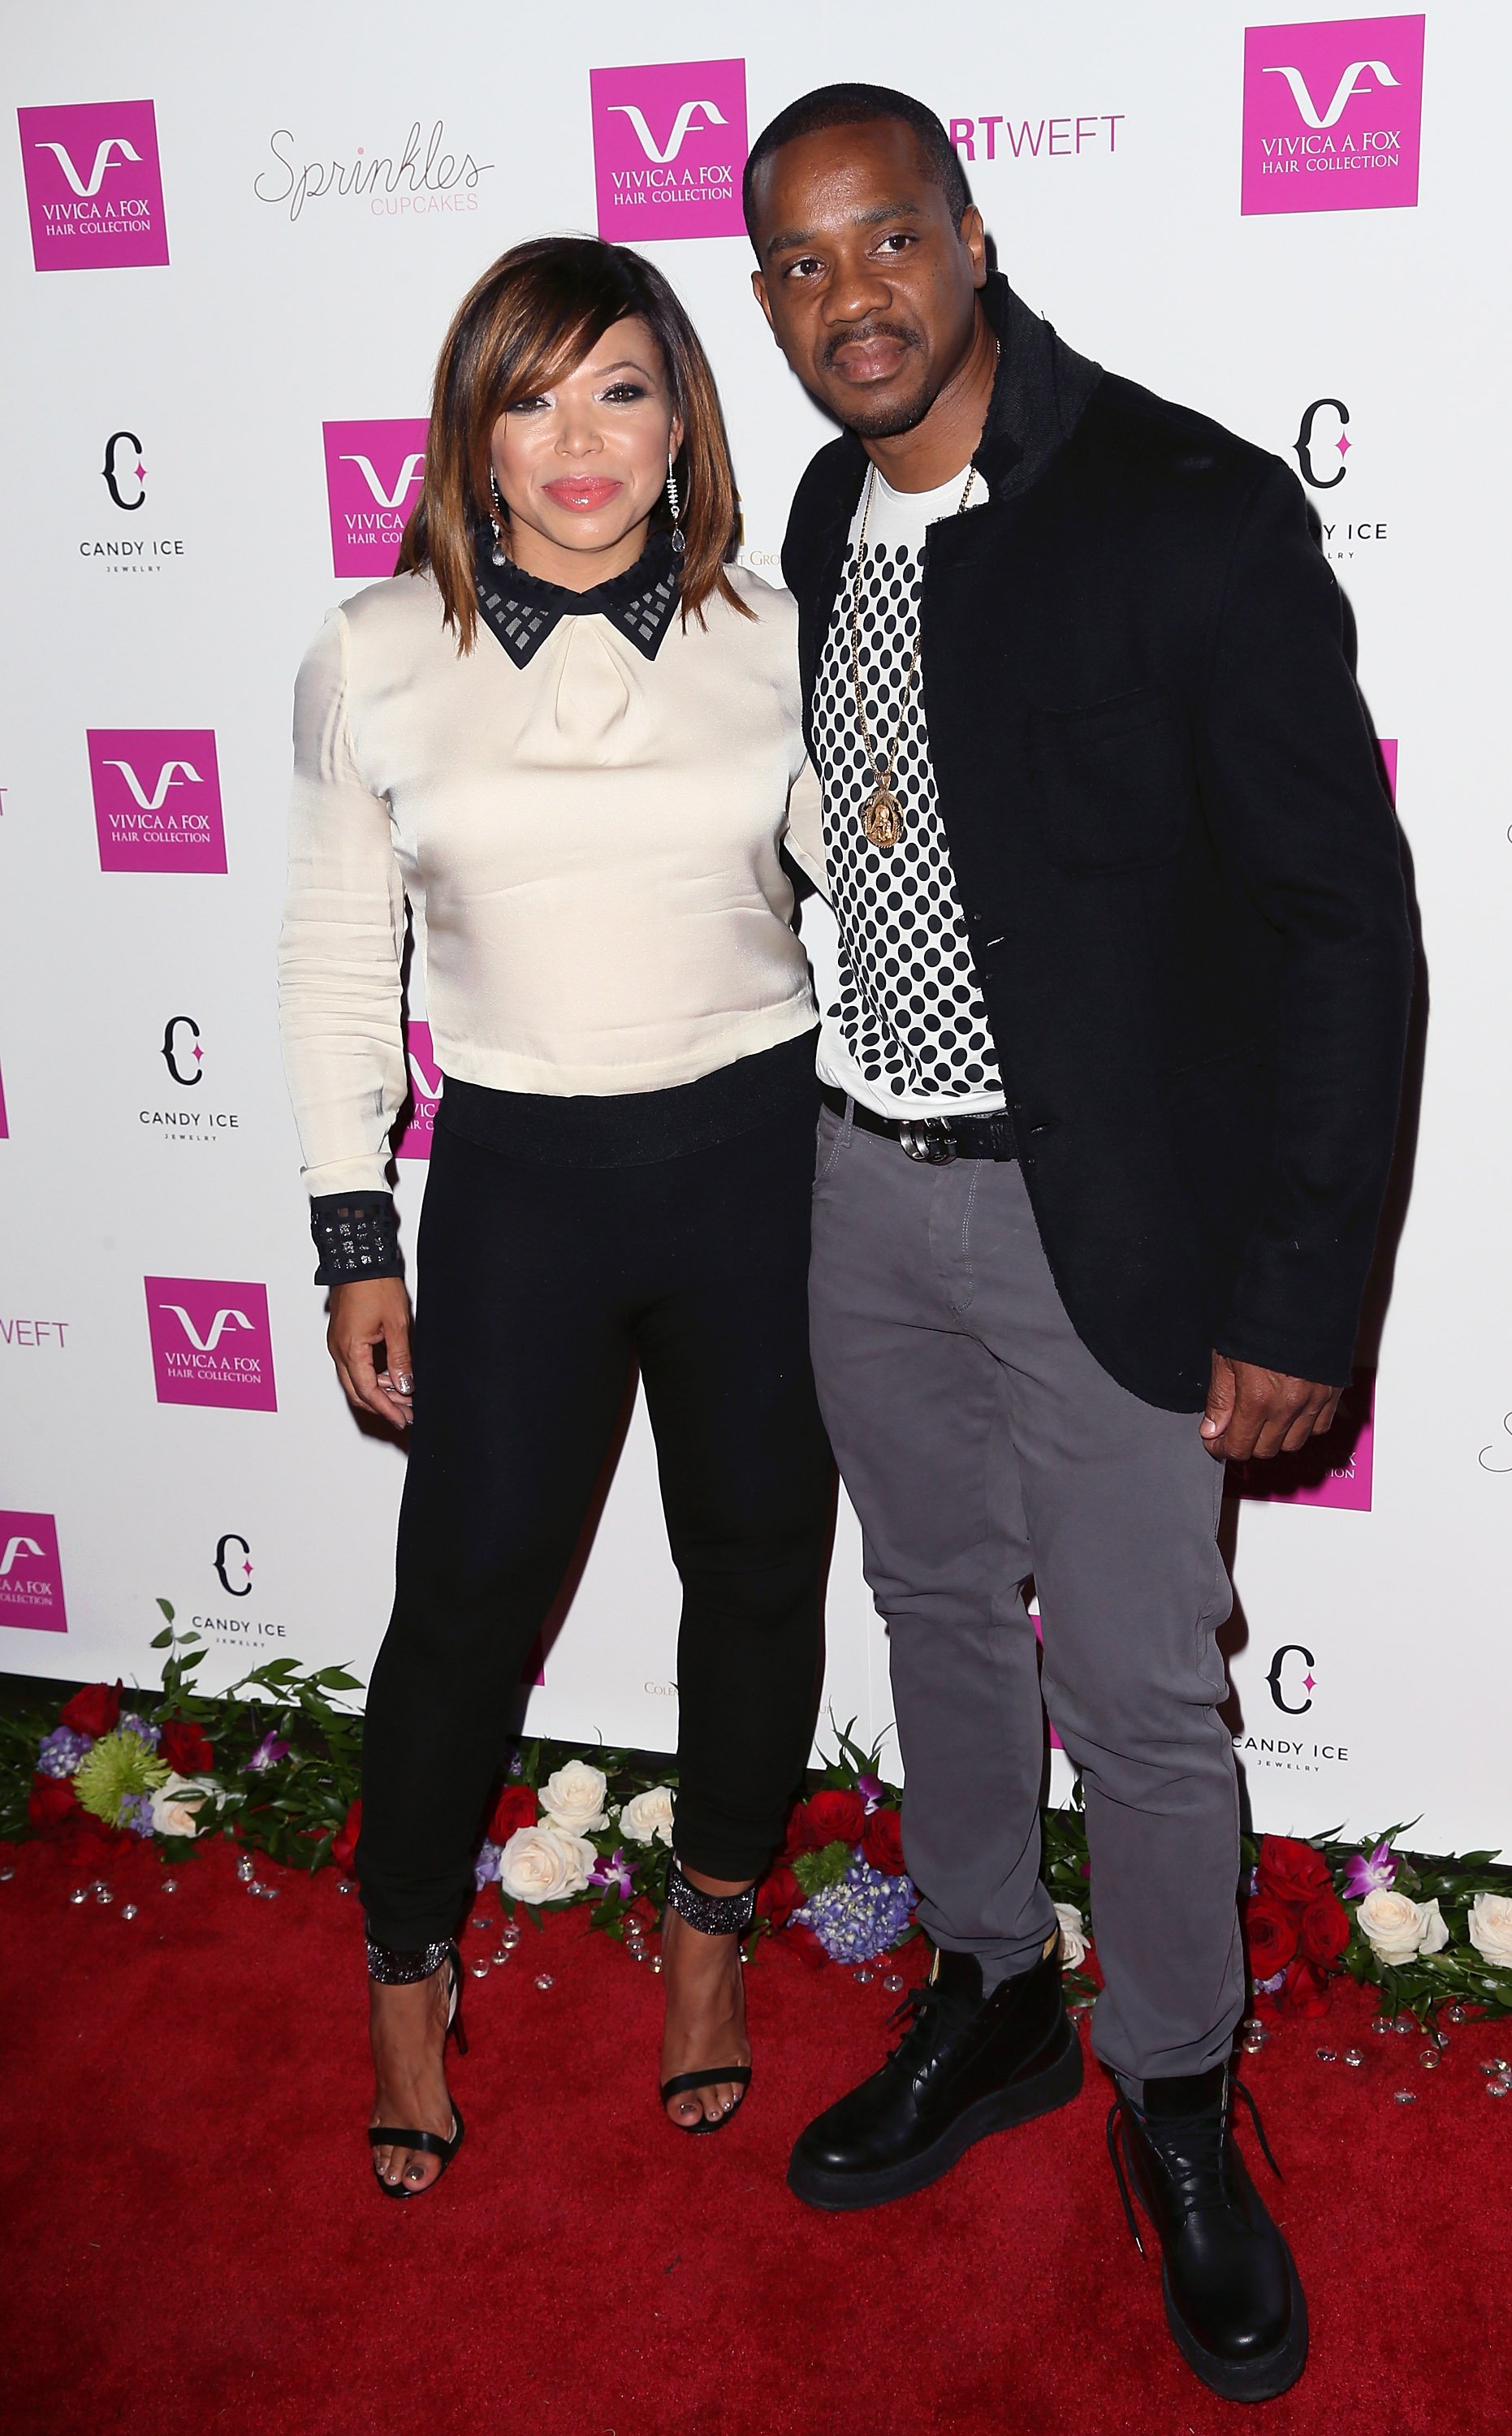 Tisha Campbell and Duane Martin attending the Vivica A. Fox 50th birthday celebration at Philippe Chow on August 2, 2014 in Beverly Hills, California. | Source: Getty